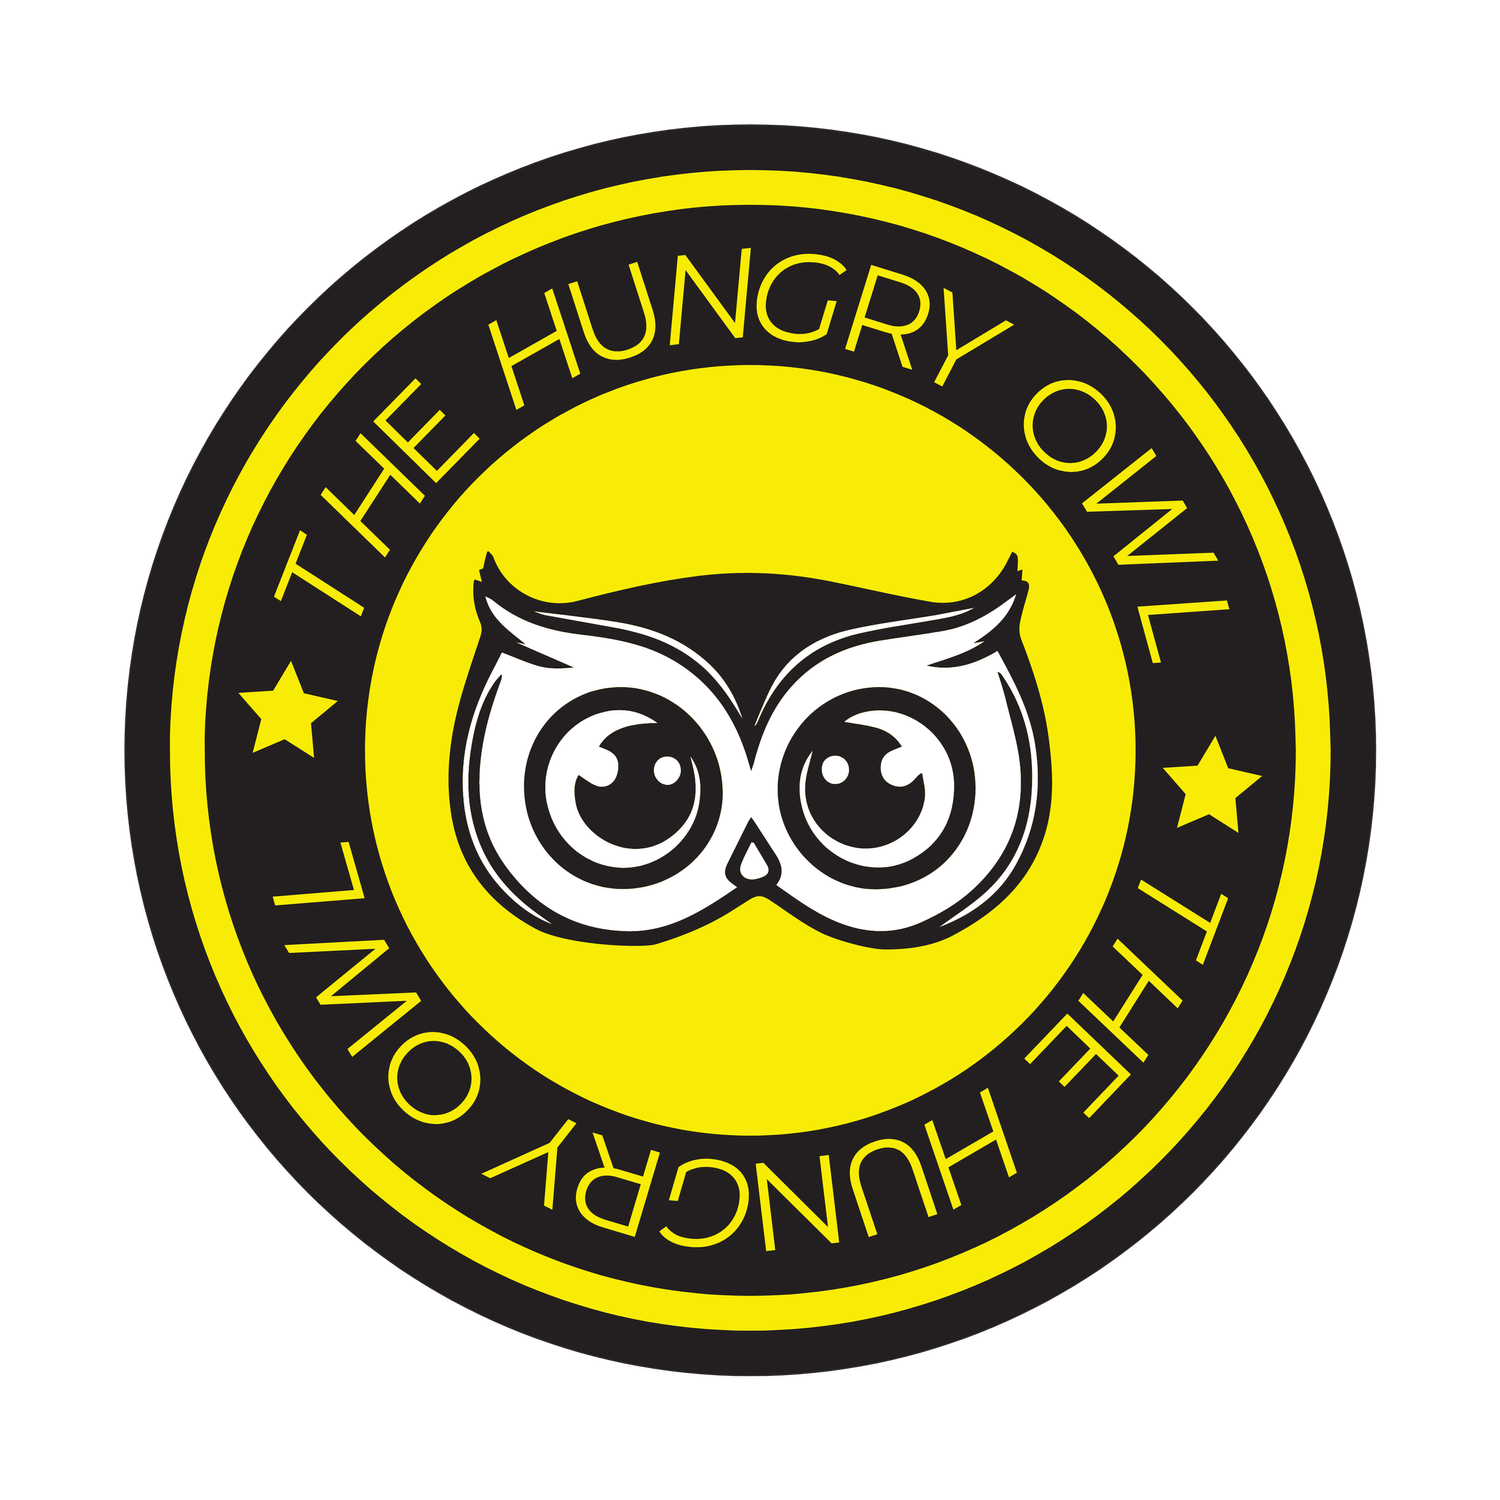 The Hungry Owl